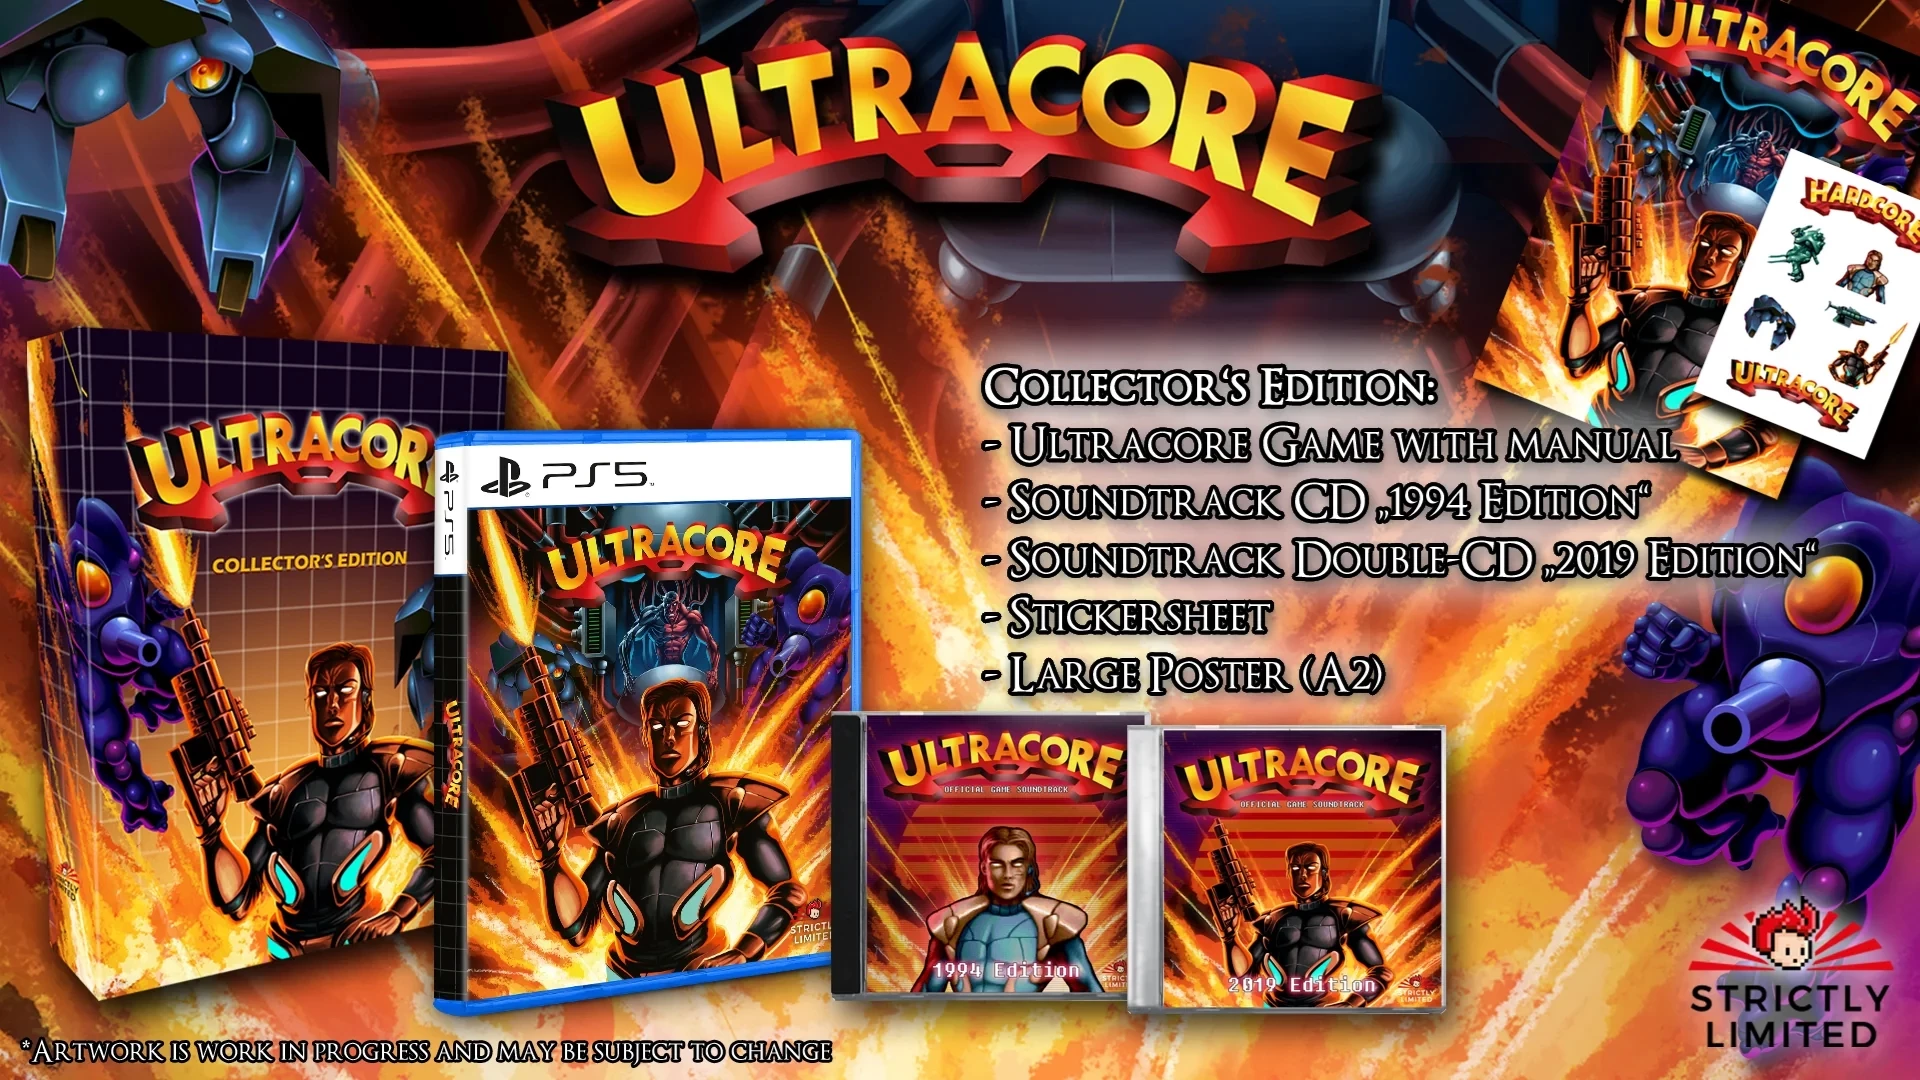 Ultracore - Collector's Edition (Strictly Limited) (PS5), Dice